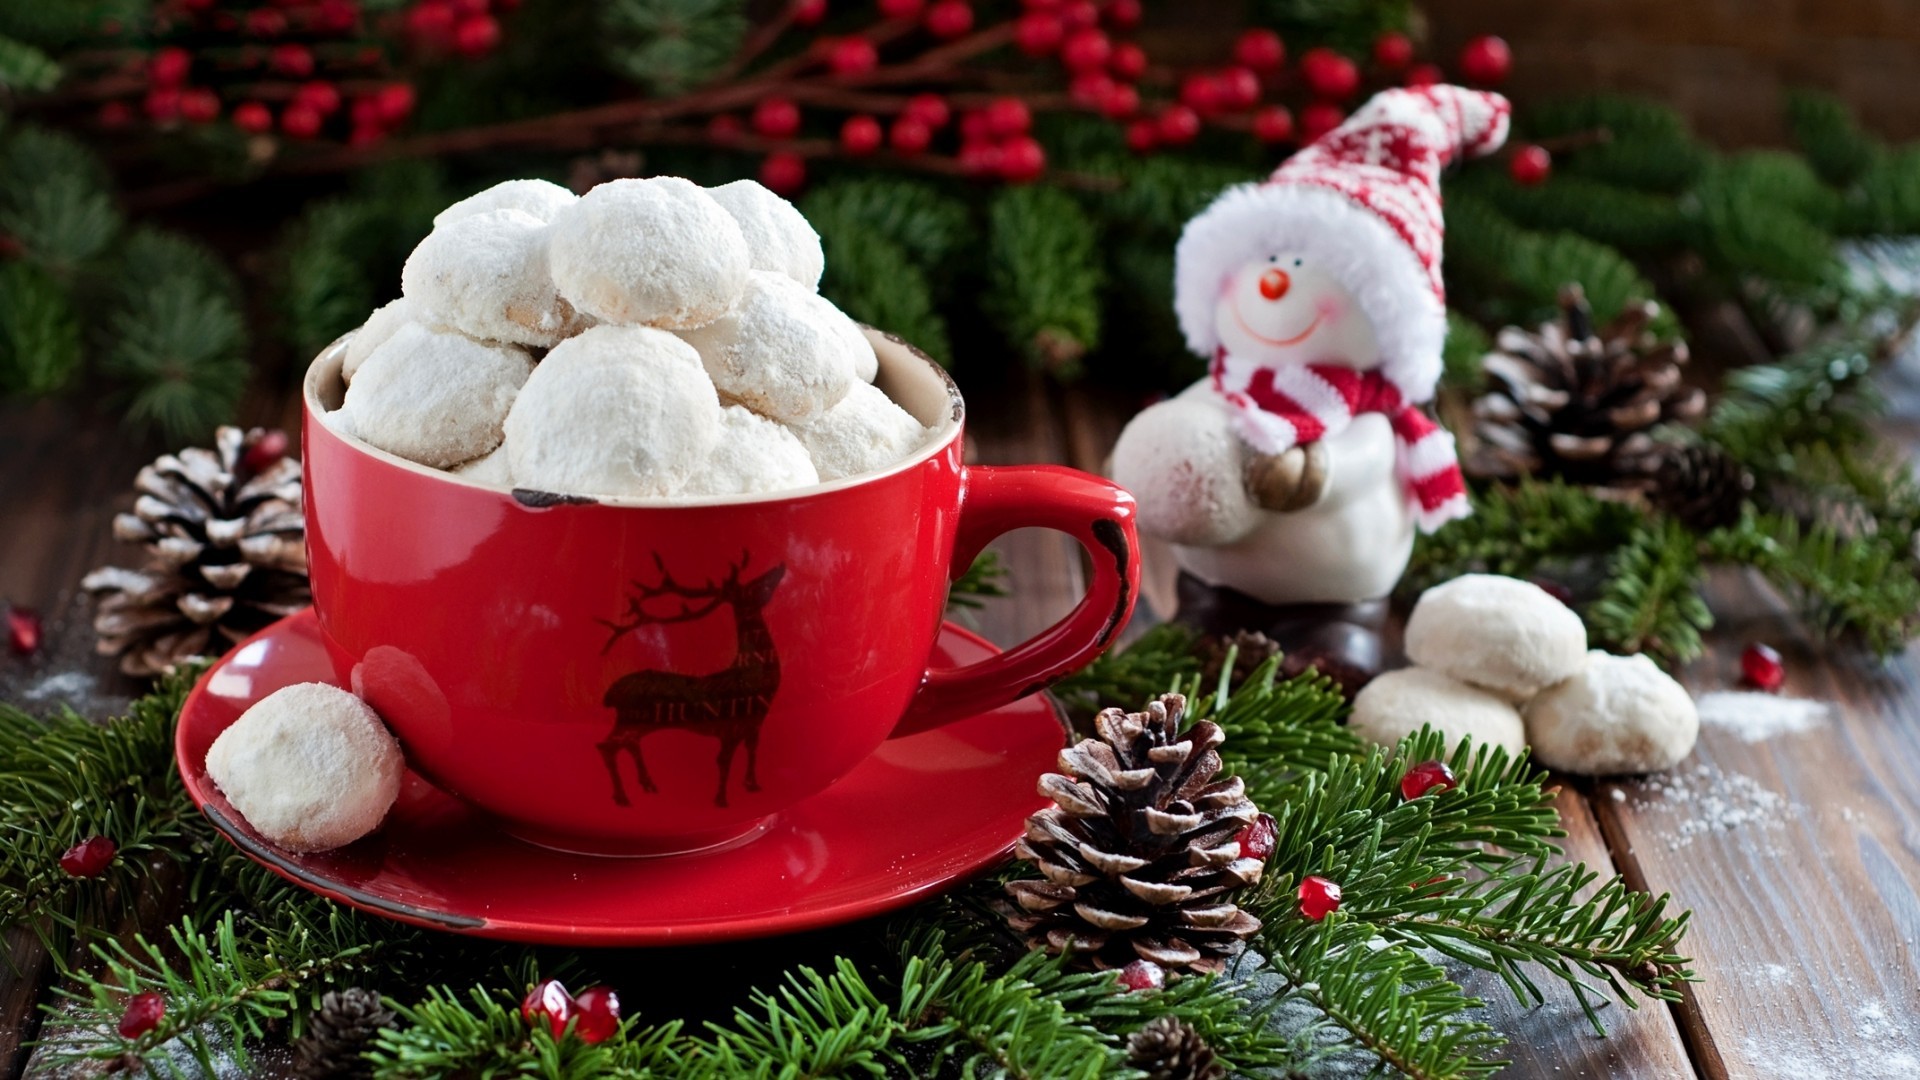 Cup Christmas Winter Holiday Wreaths Sweets 1920x1080